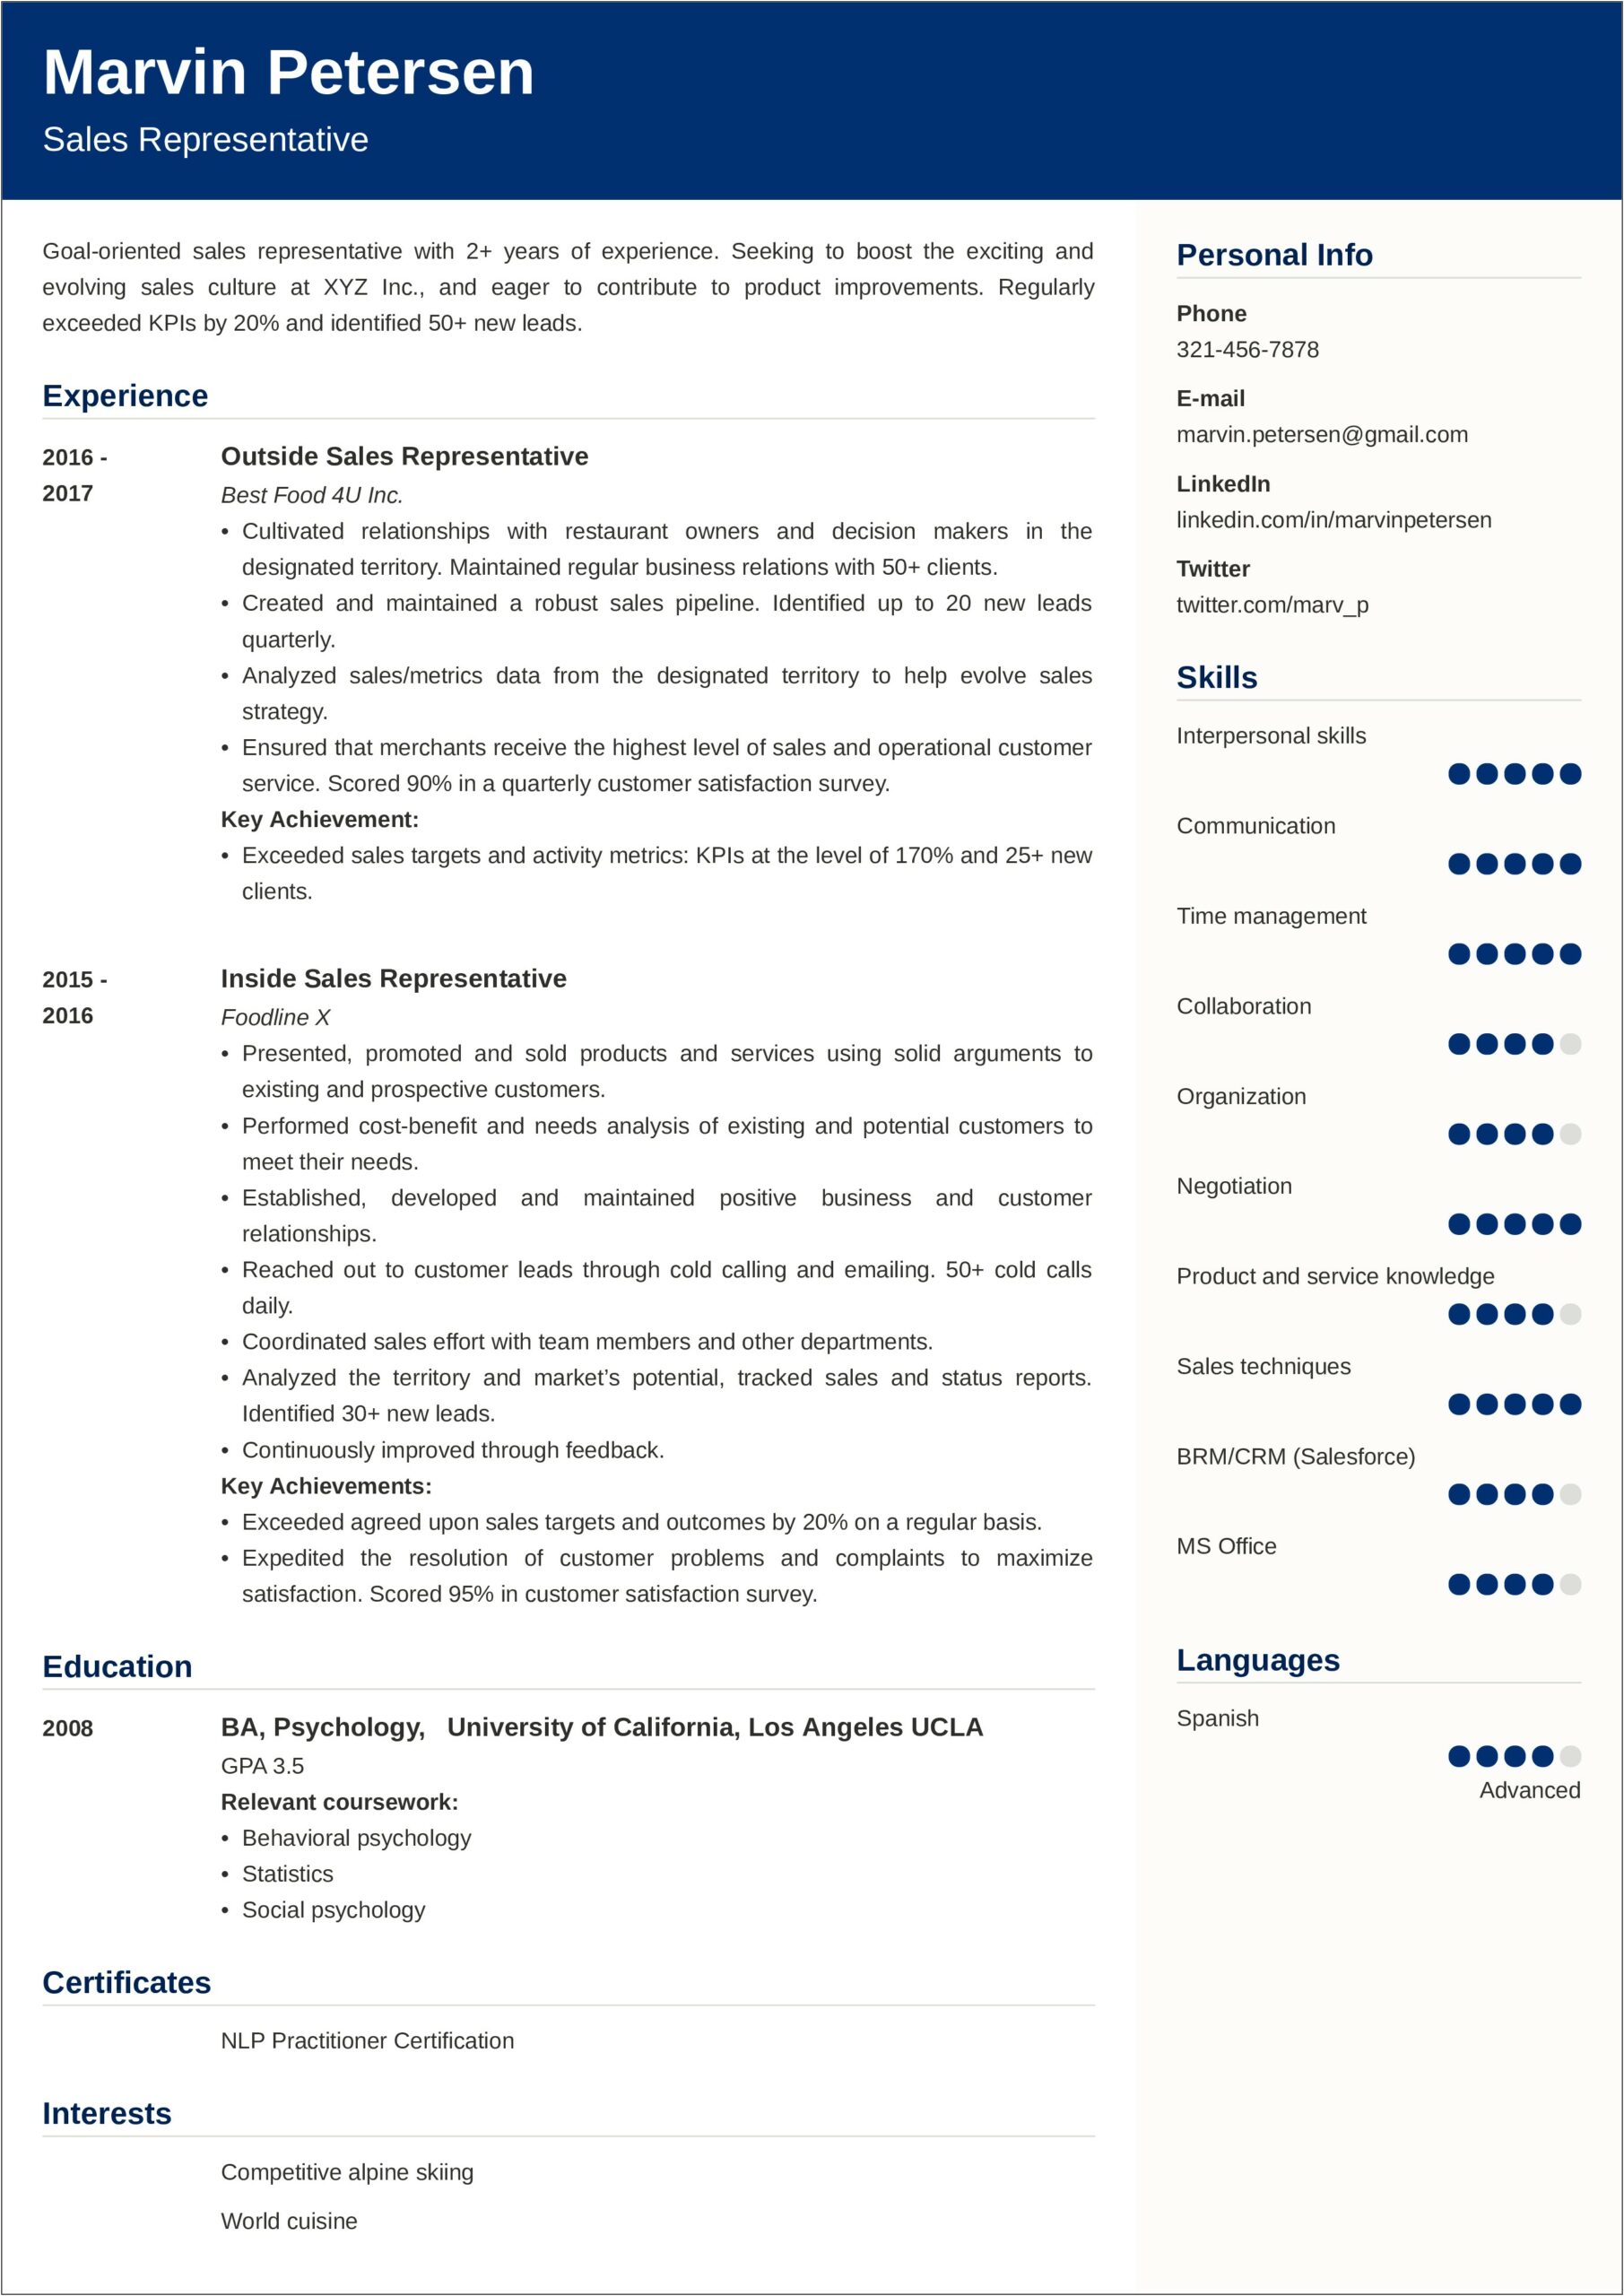 Skills To Include On Resume For Salesperson